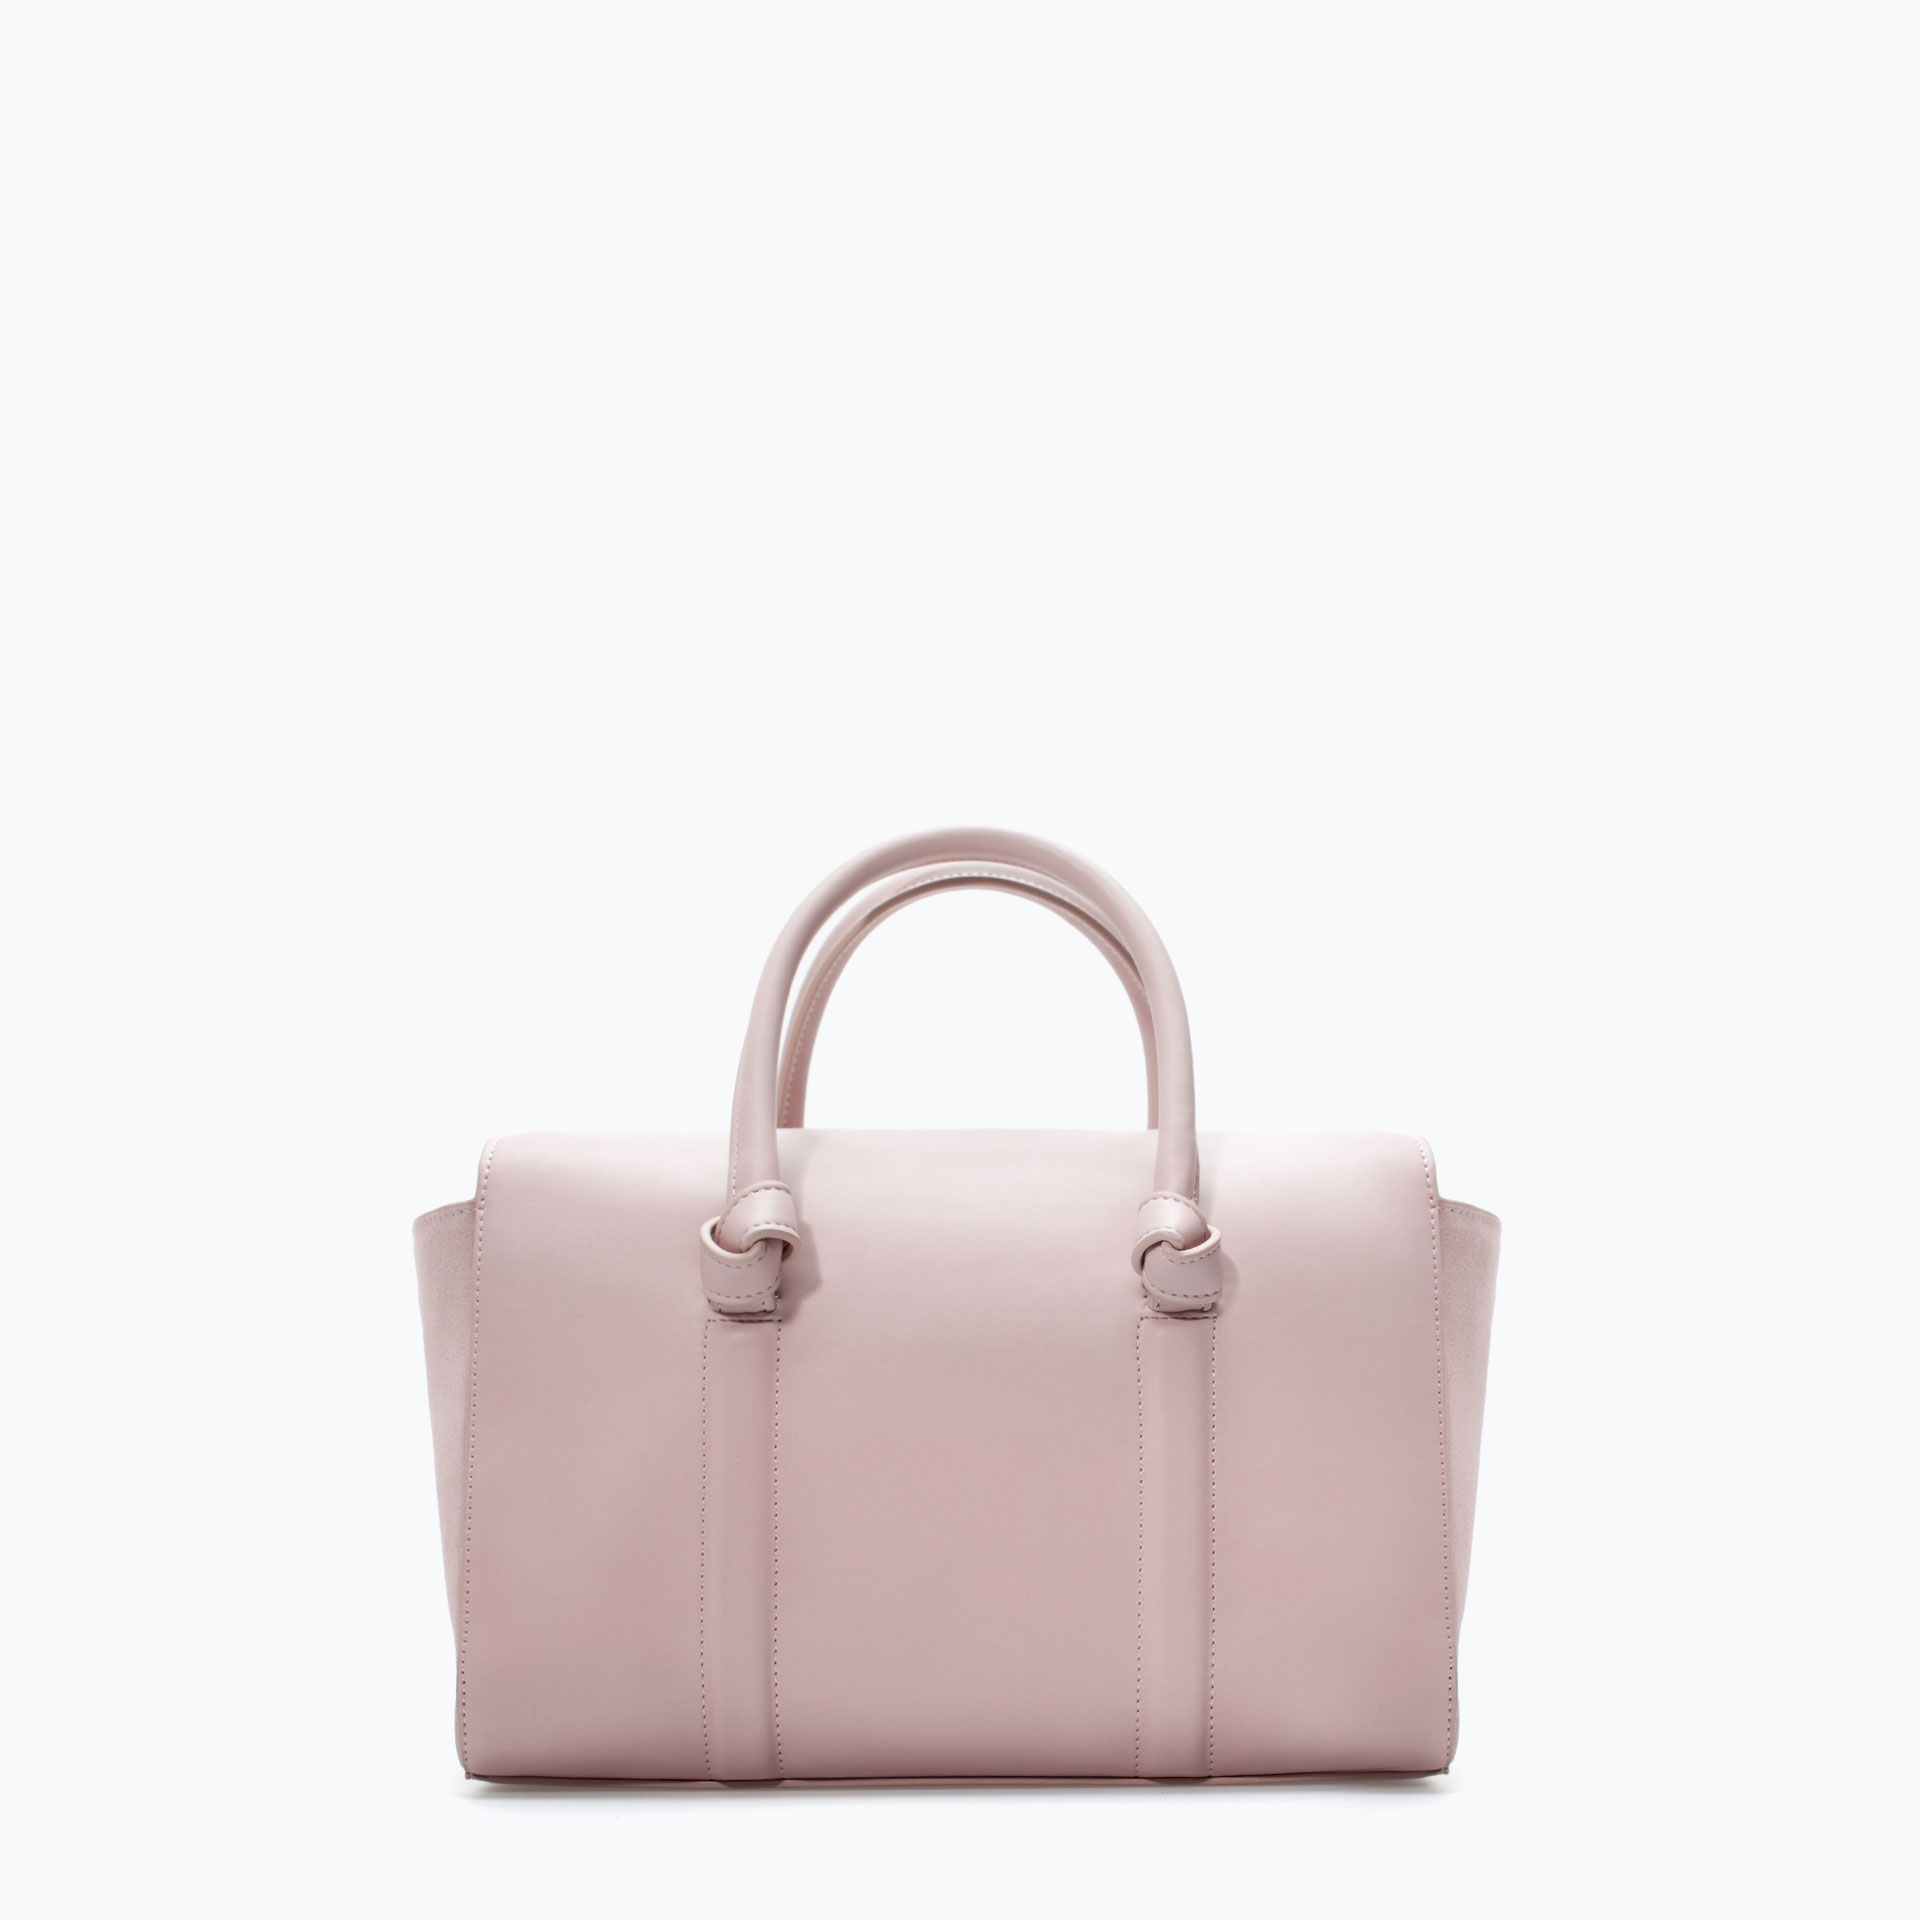 Zara Bowling Bag with Knots in Pink (Light pink) | Lyst